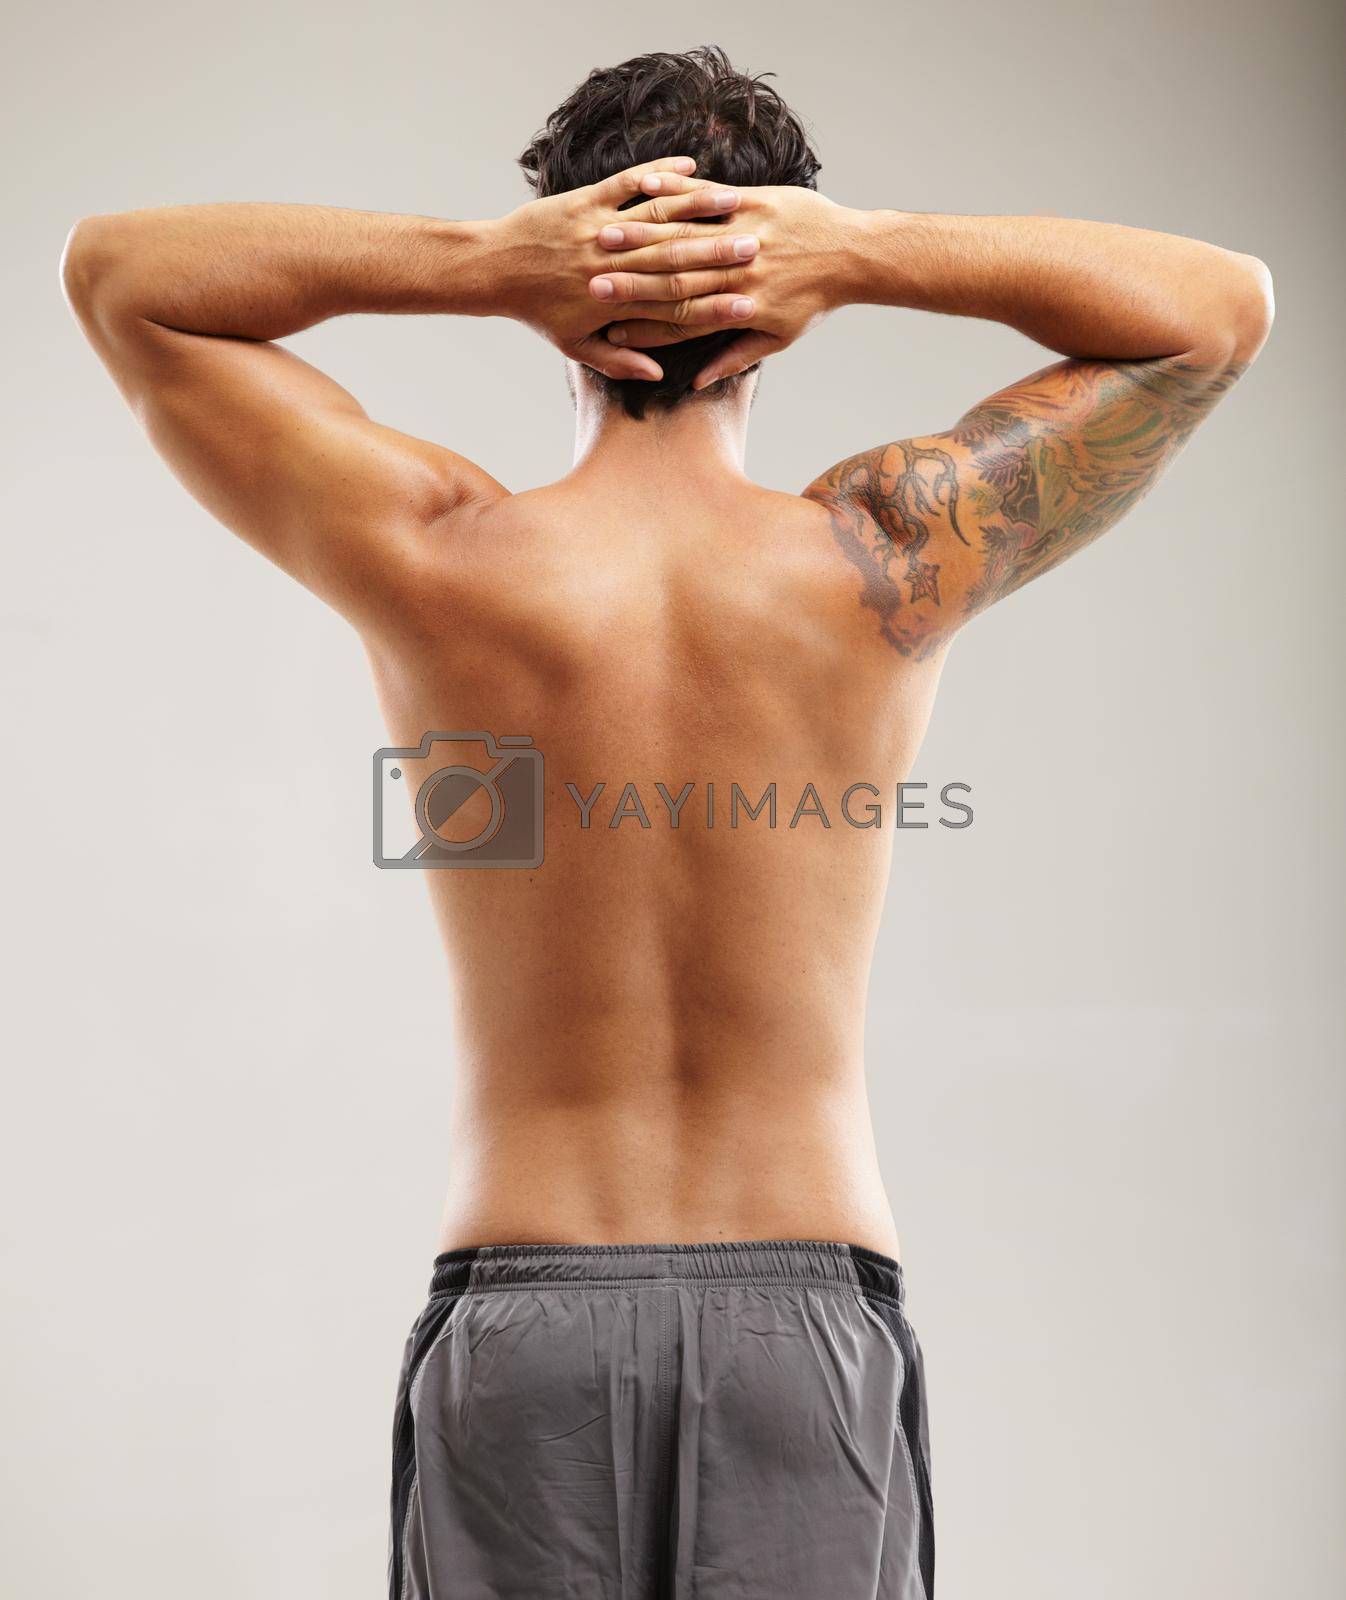 Royalty free image of He takes stretching seriously. Rearview of a shirtless man stretching his neck before a workout. by YuriArcurs